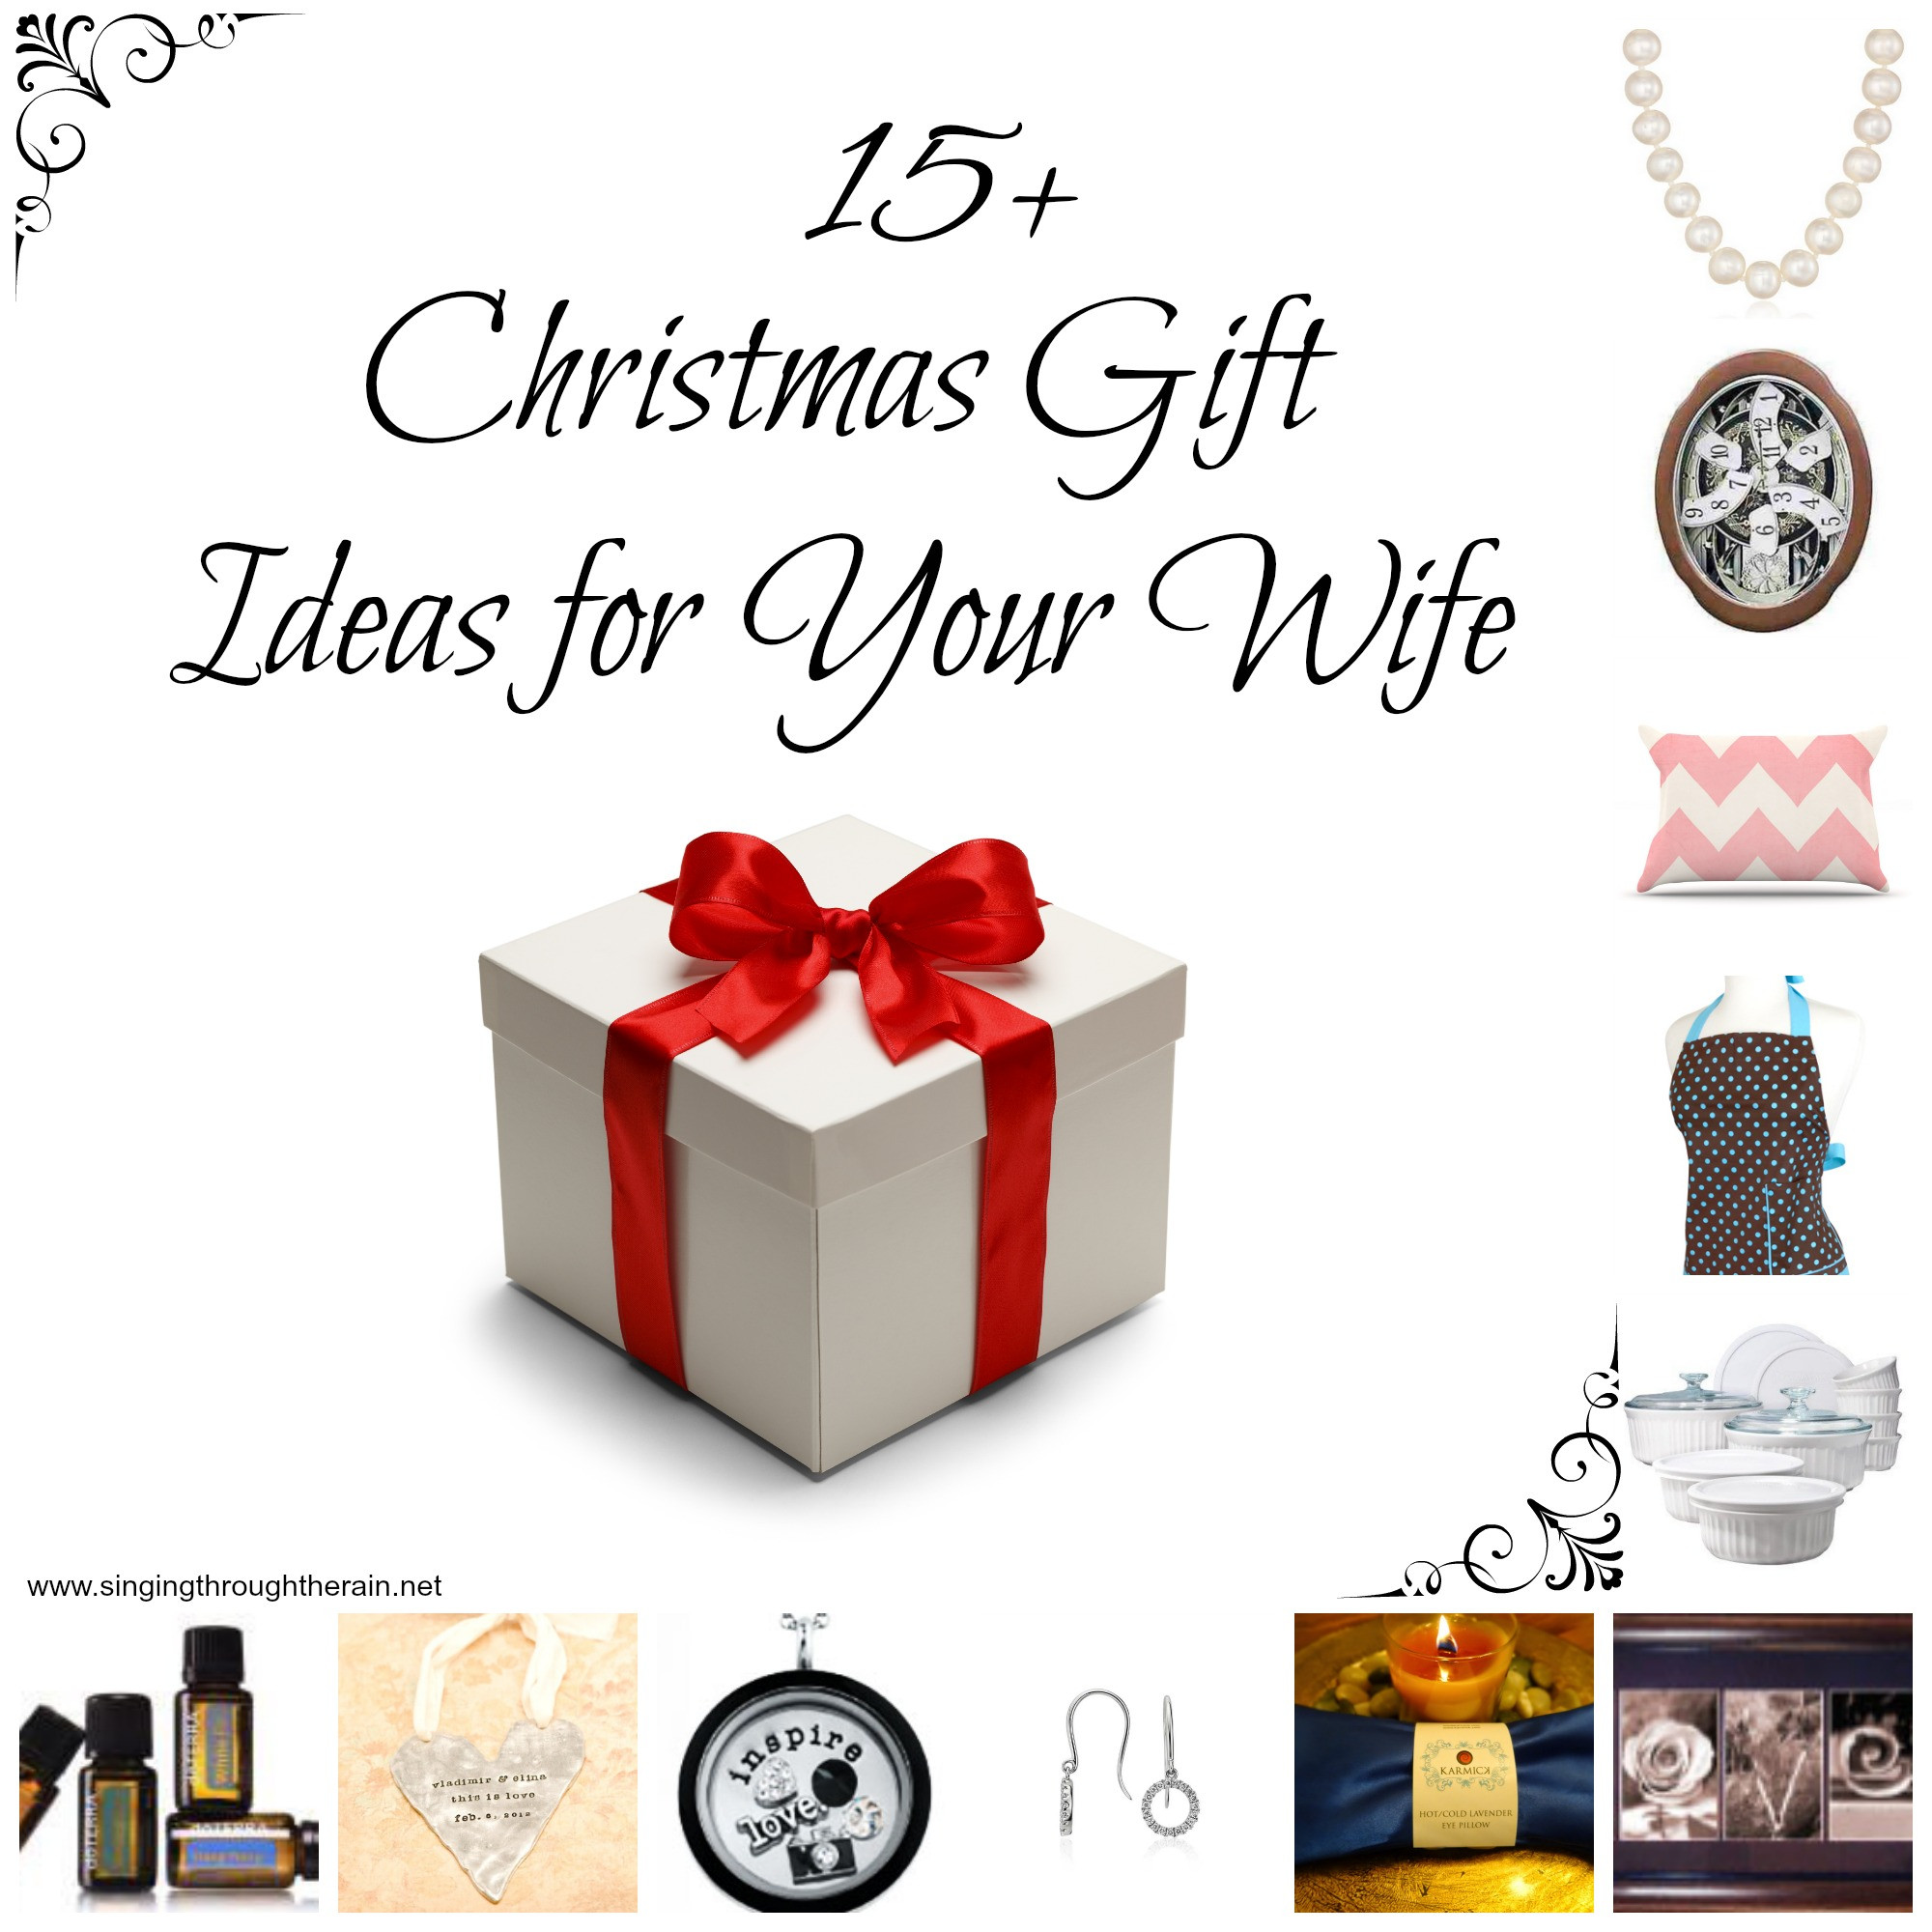 Holiday Gift Ideas For The Wife
 15 Christmas Gift Ideas for Your Wife